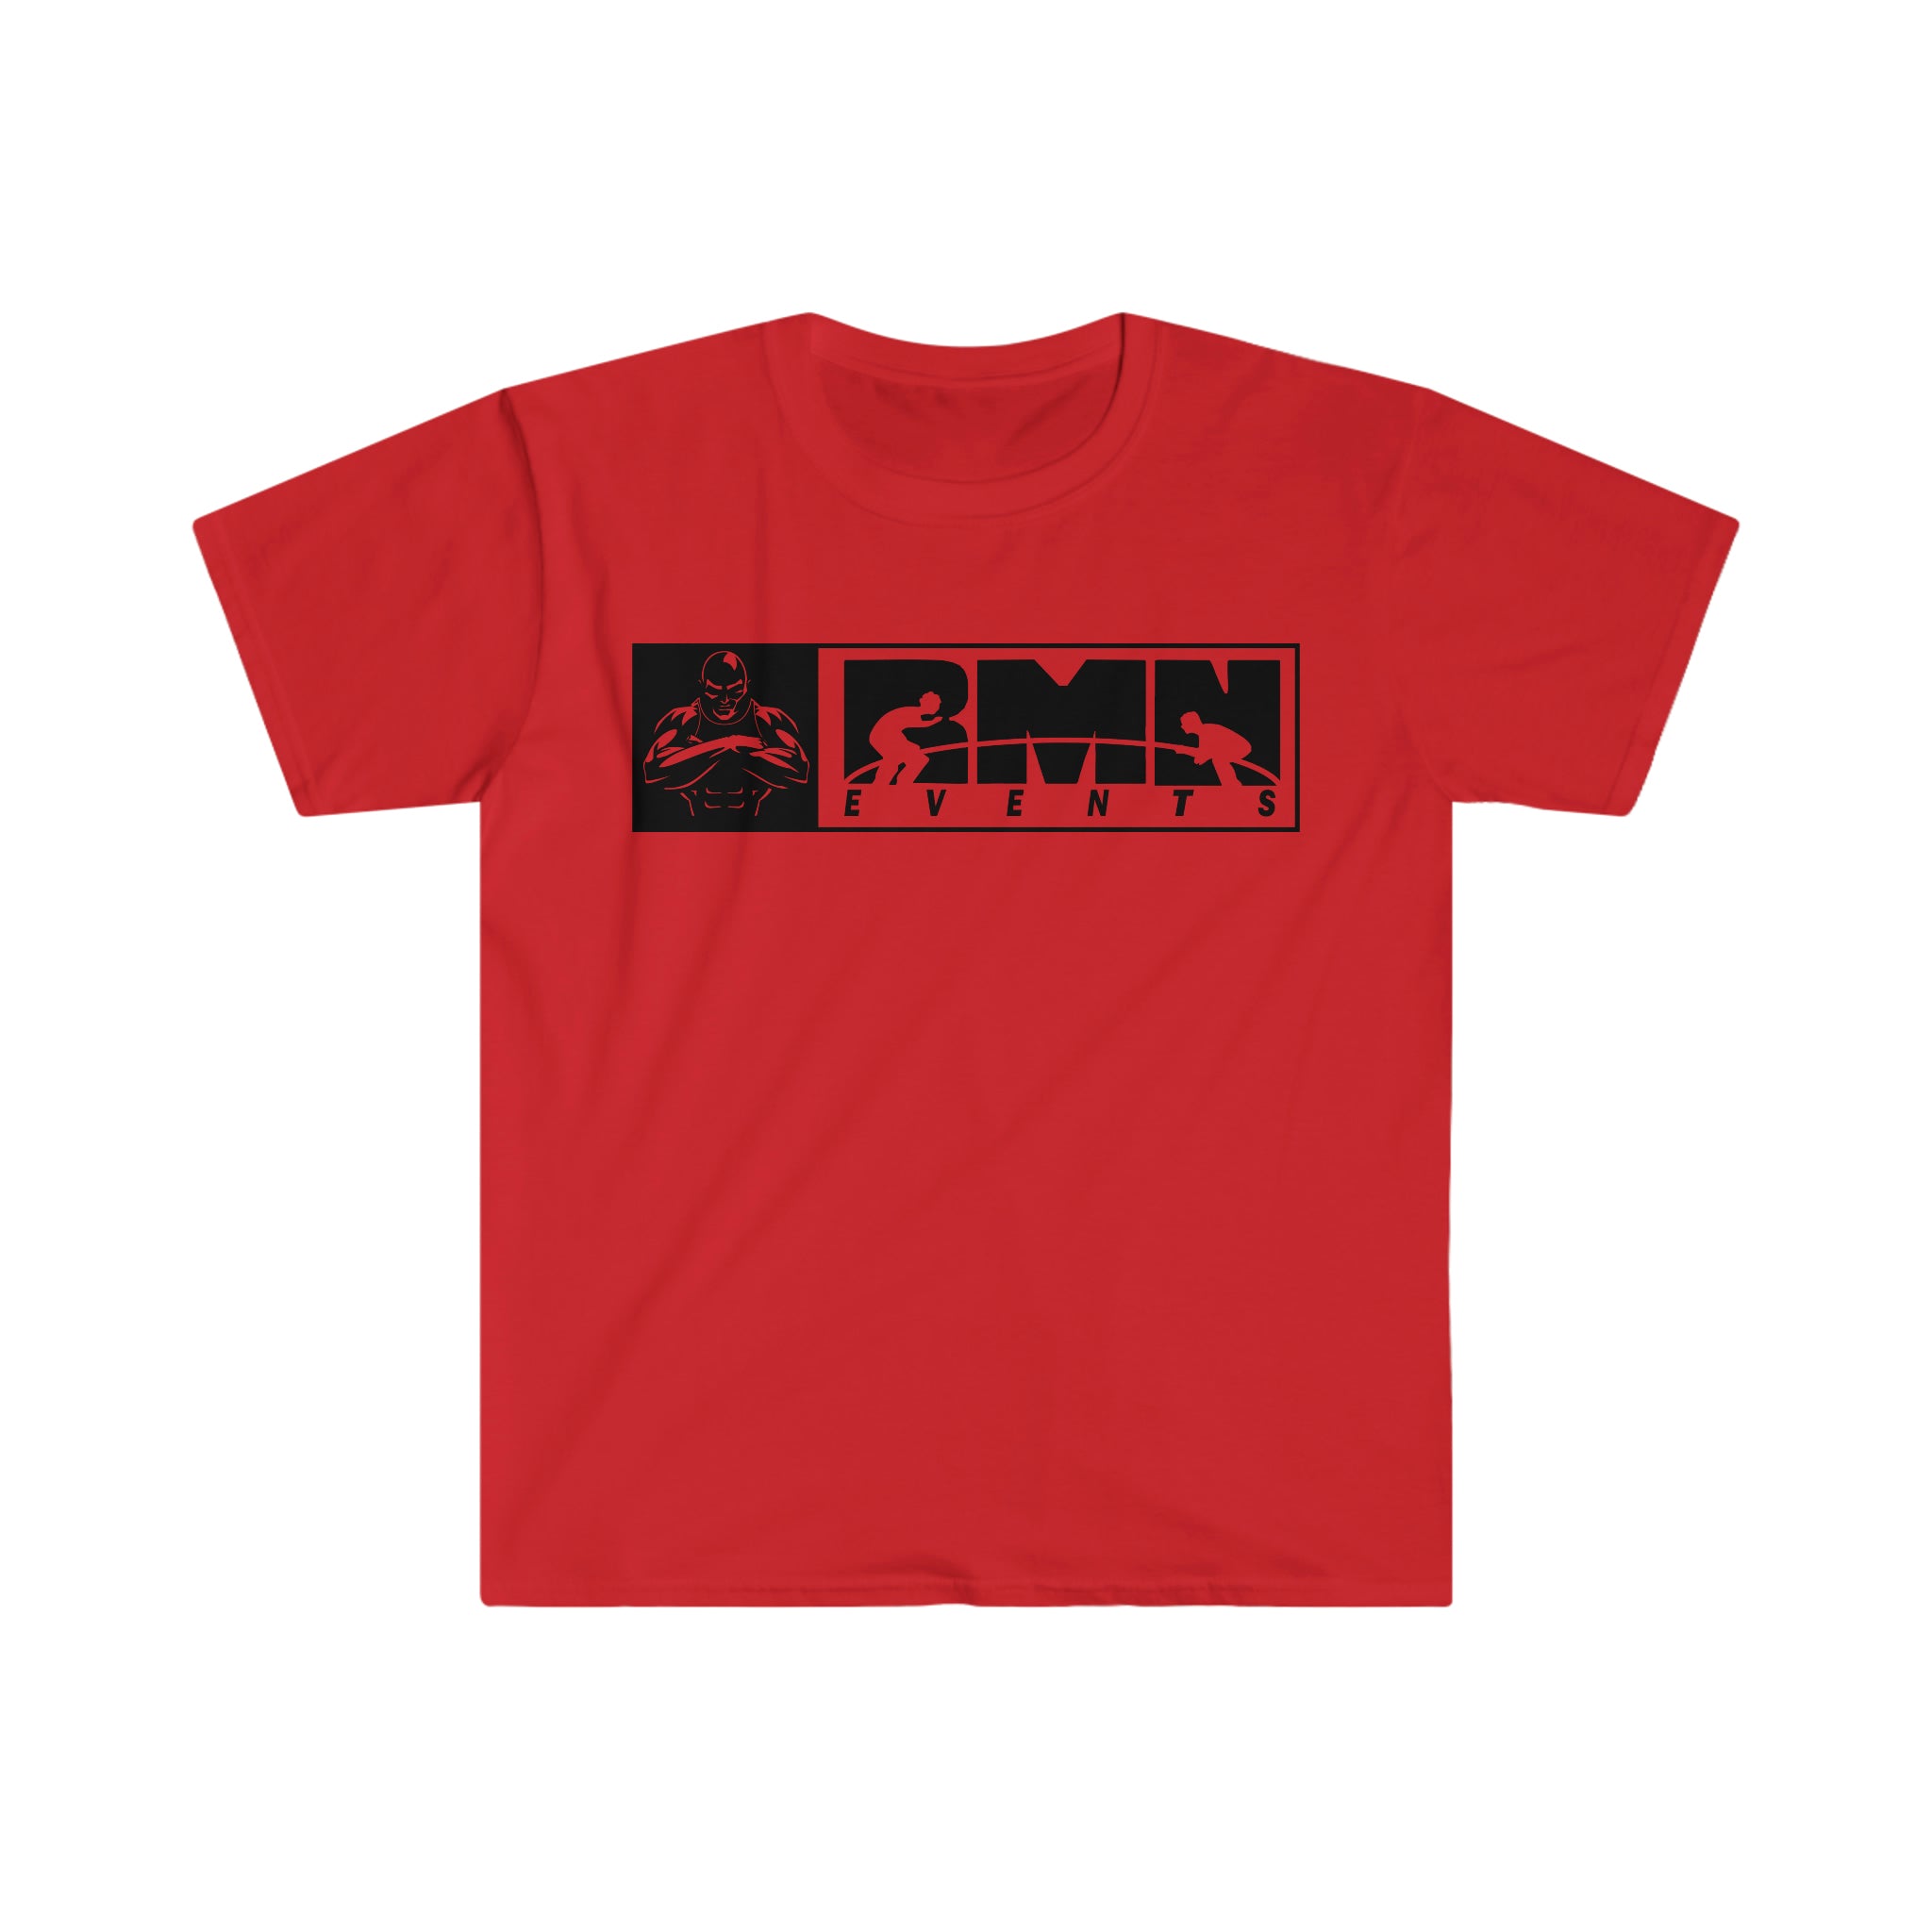 RMN Events Unisex Softstyle T-Shirt